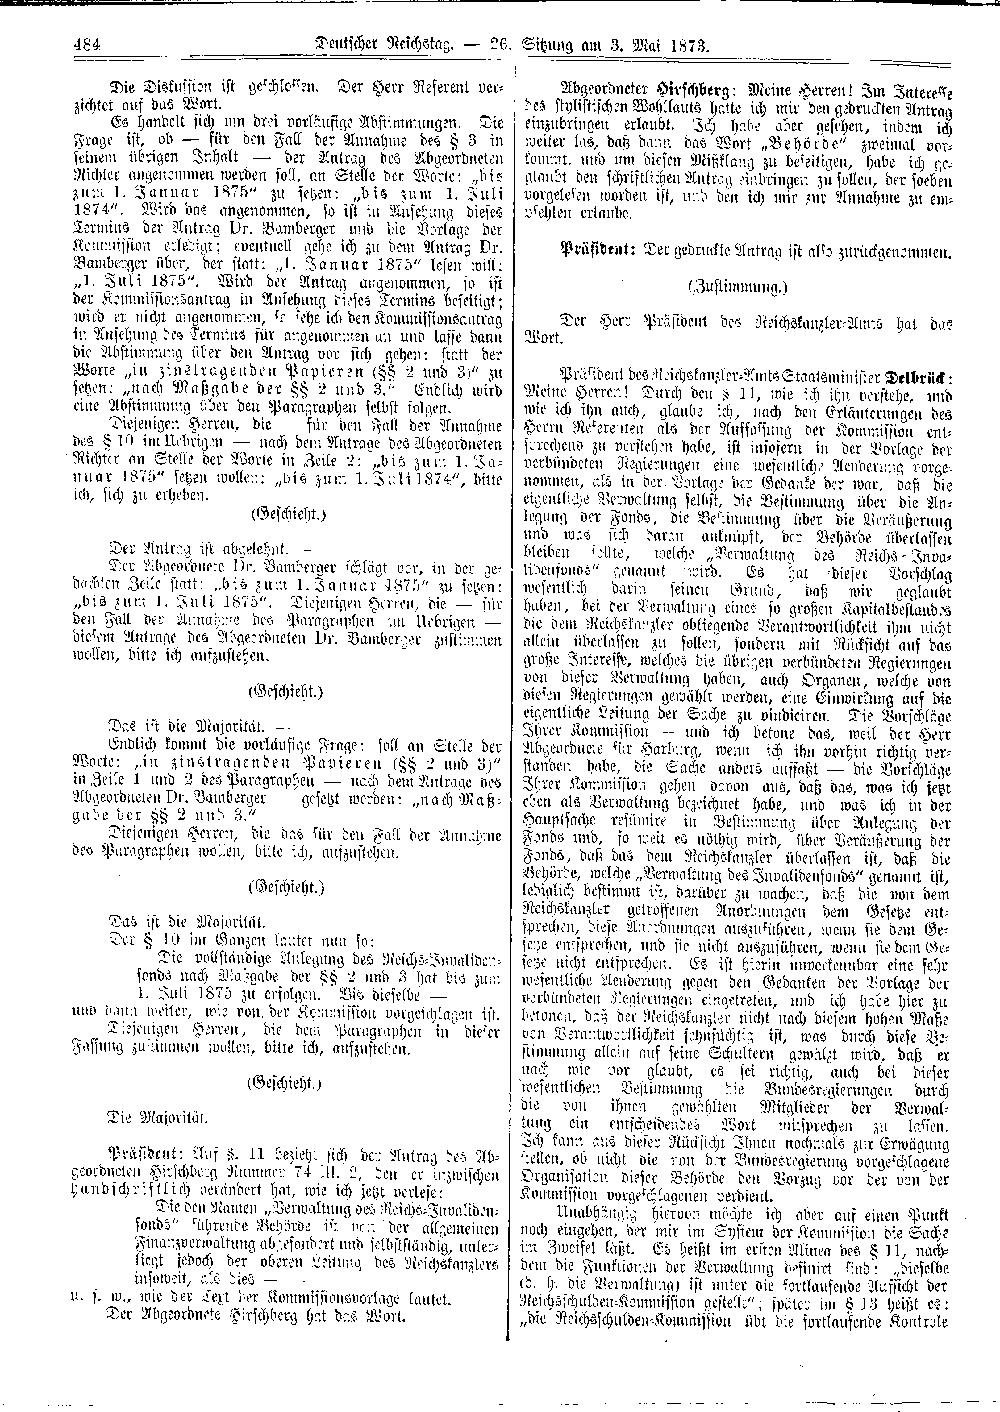 Scan of page 484